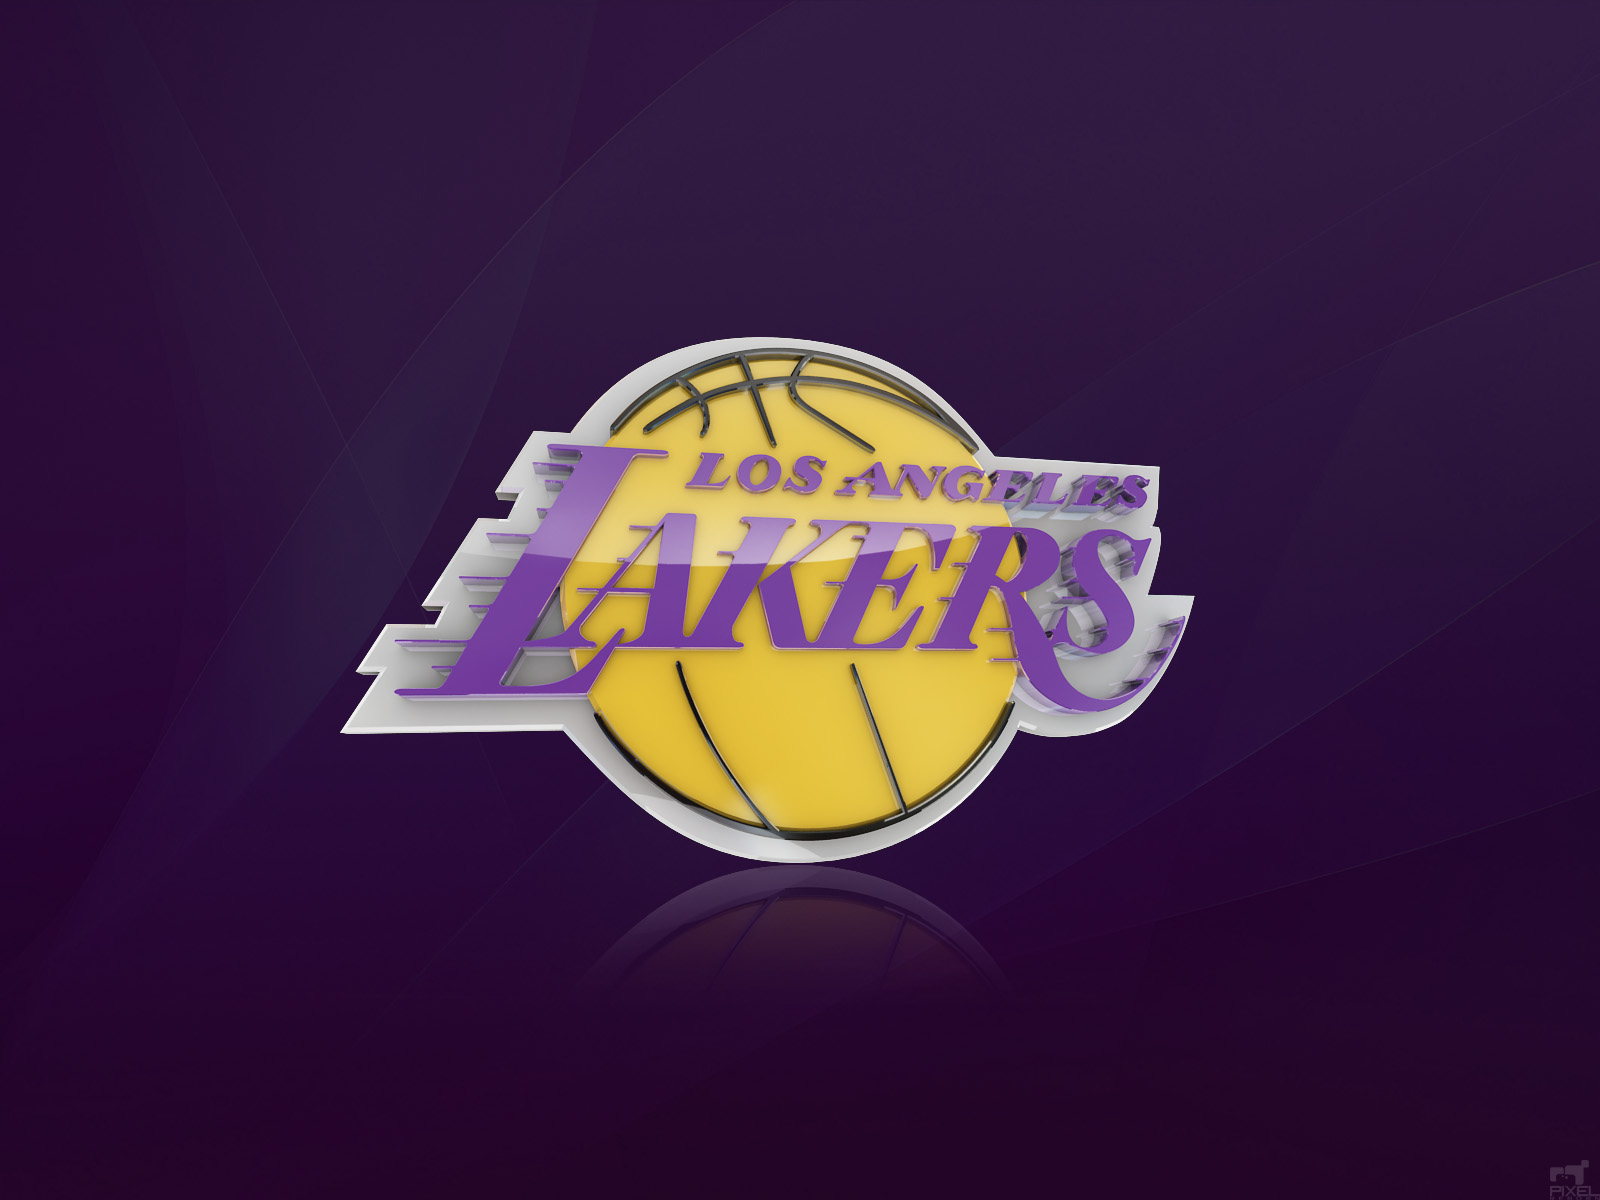 Los Angeles Lakers Logo Background HD Wallpaper